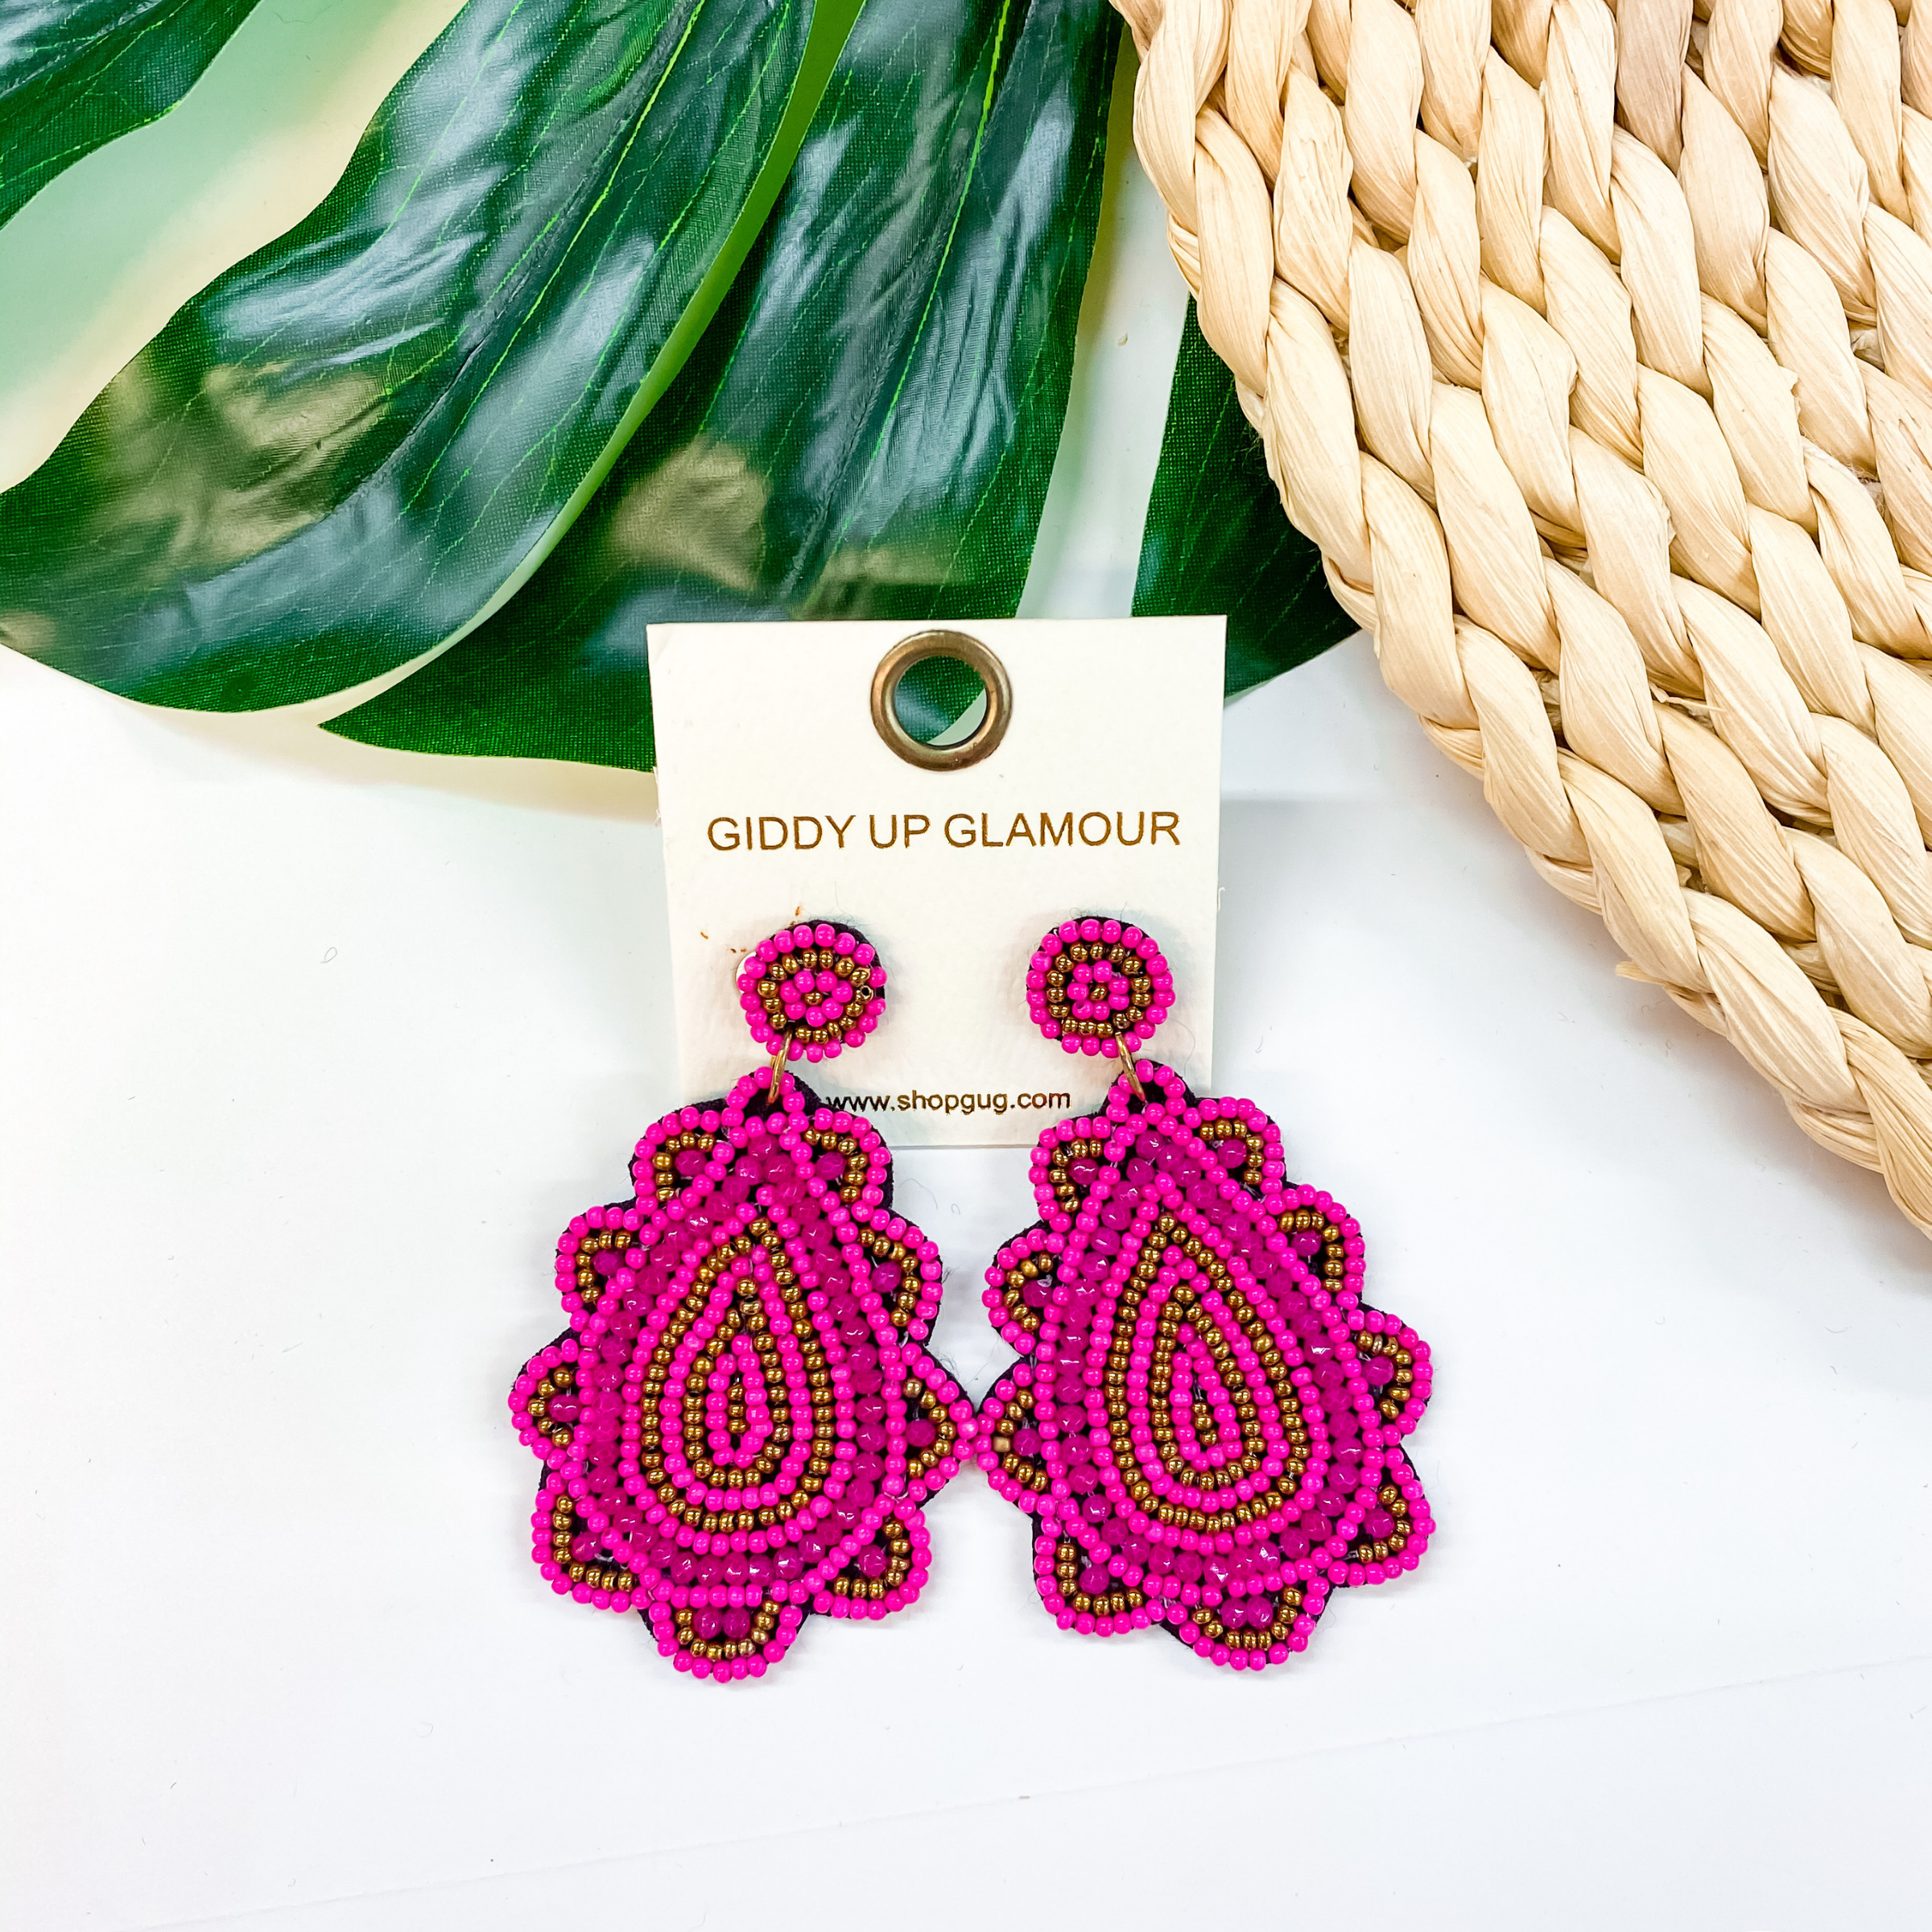 Light Up The Night Seed Bead Teardrop Earrings in Dark Pink - Giddy Up Glamour Boutique